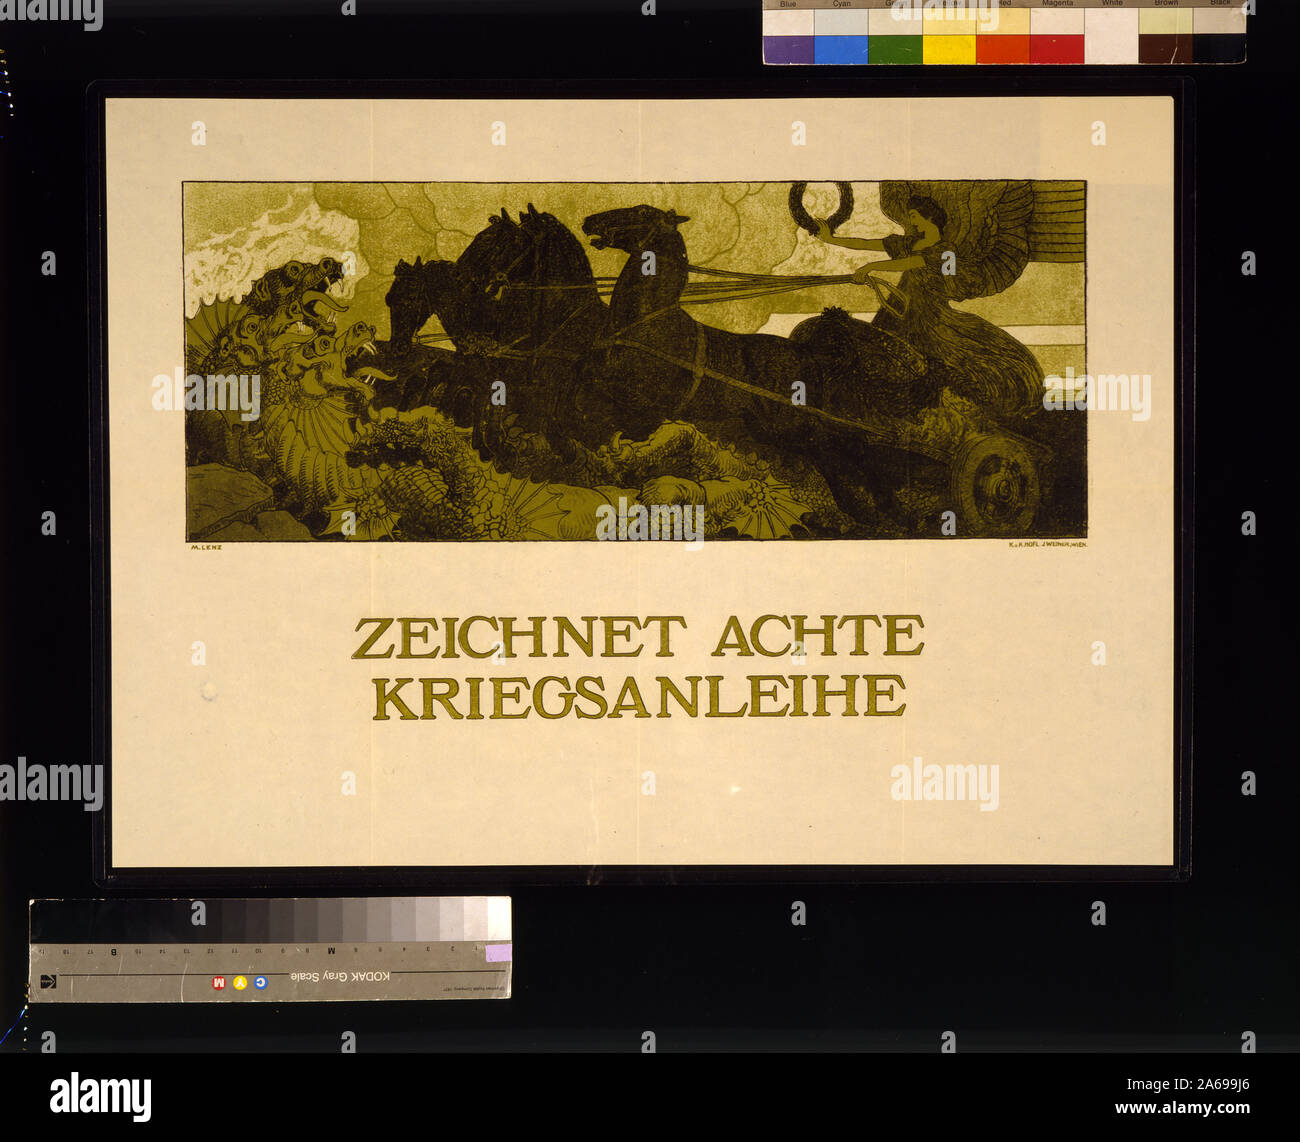 Zeichnet achte Kriegsanleihe Abstract: Poster shows a winged goddess, in a chariot pulled by four horses, holding a laurel wreath as she crushes three dragons. Text: Subscribe to the 8th War Loan. Stock Photo